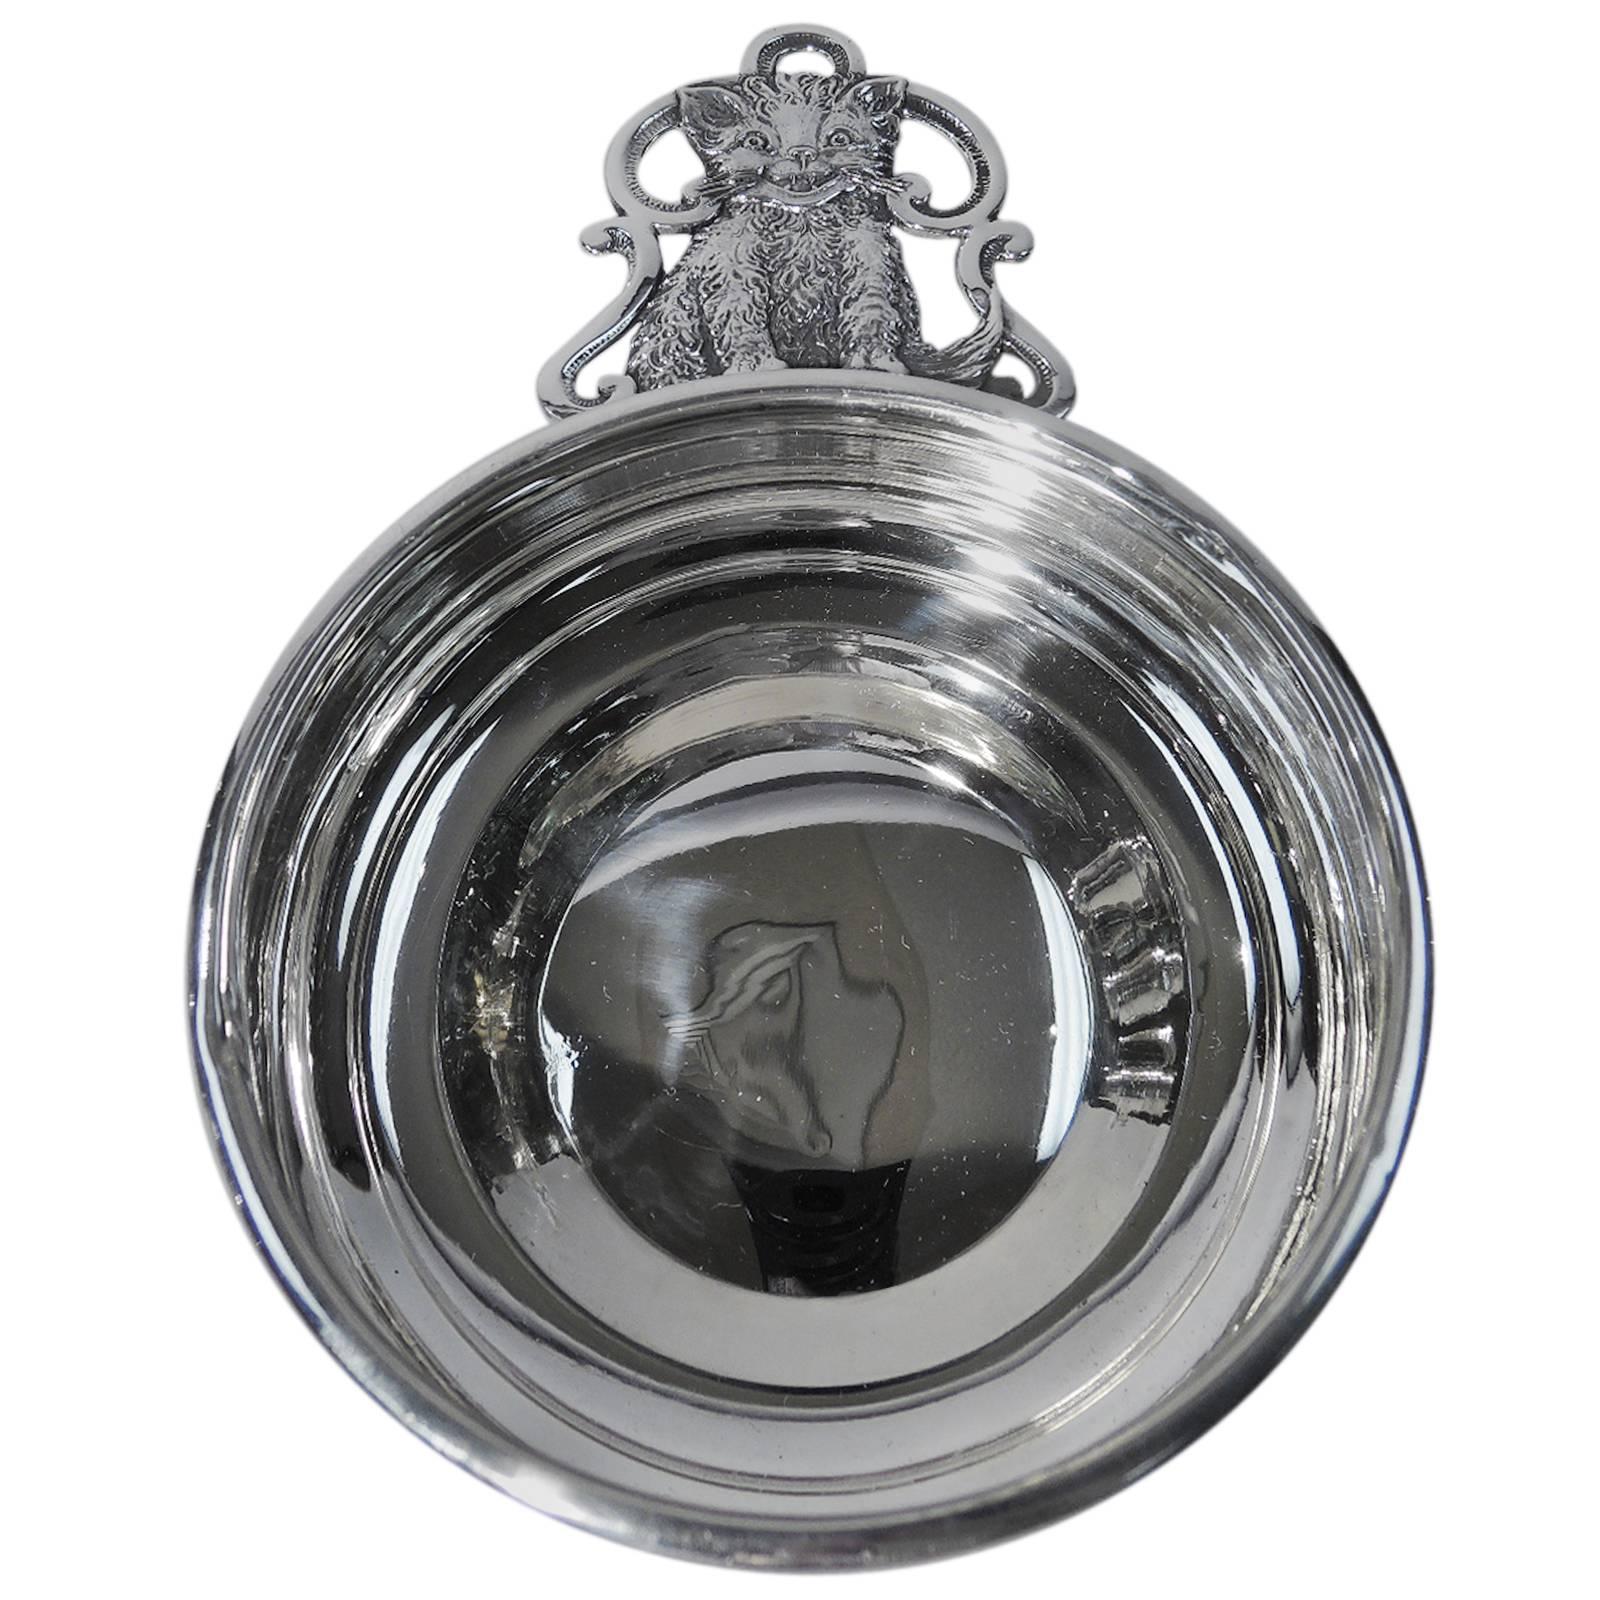 Open Wide for Kitty Cat: American Sterling Silver Porringer with Fluff Ball Puss